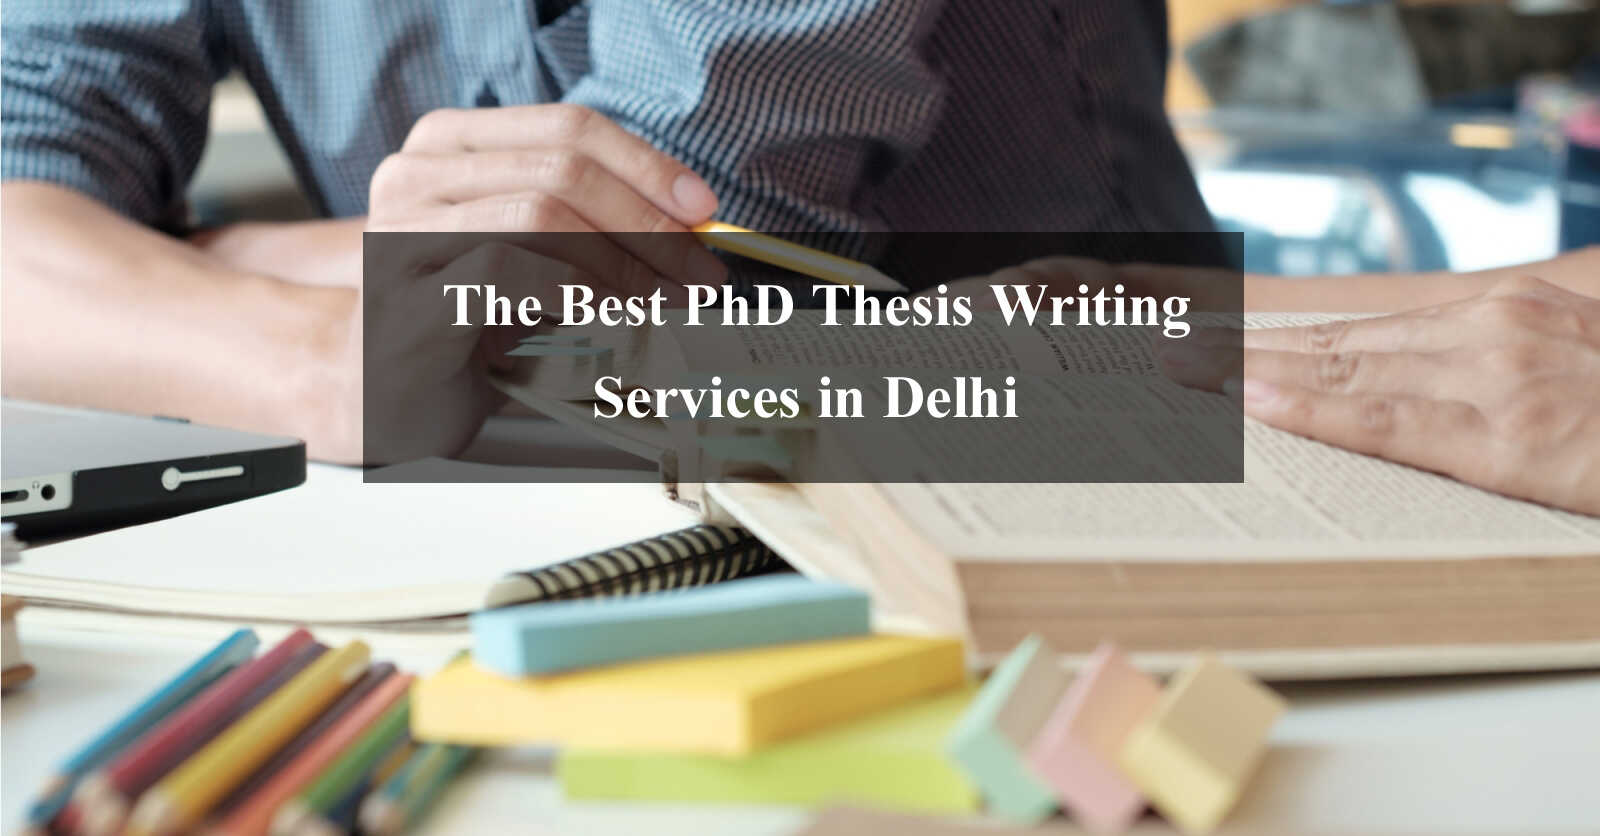 thesis writing cost in india